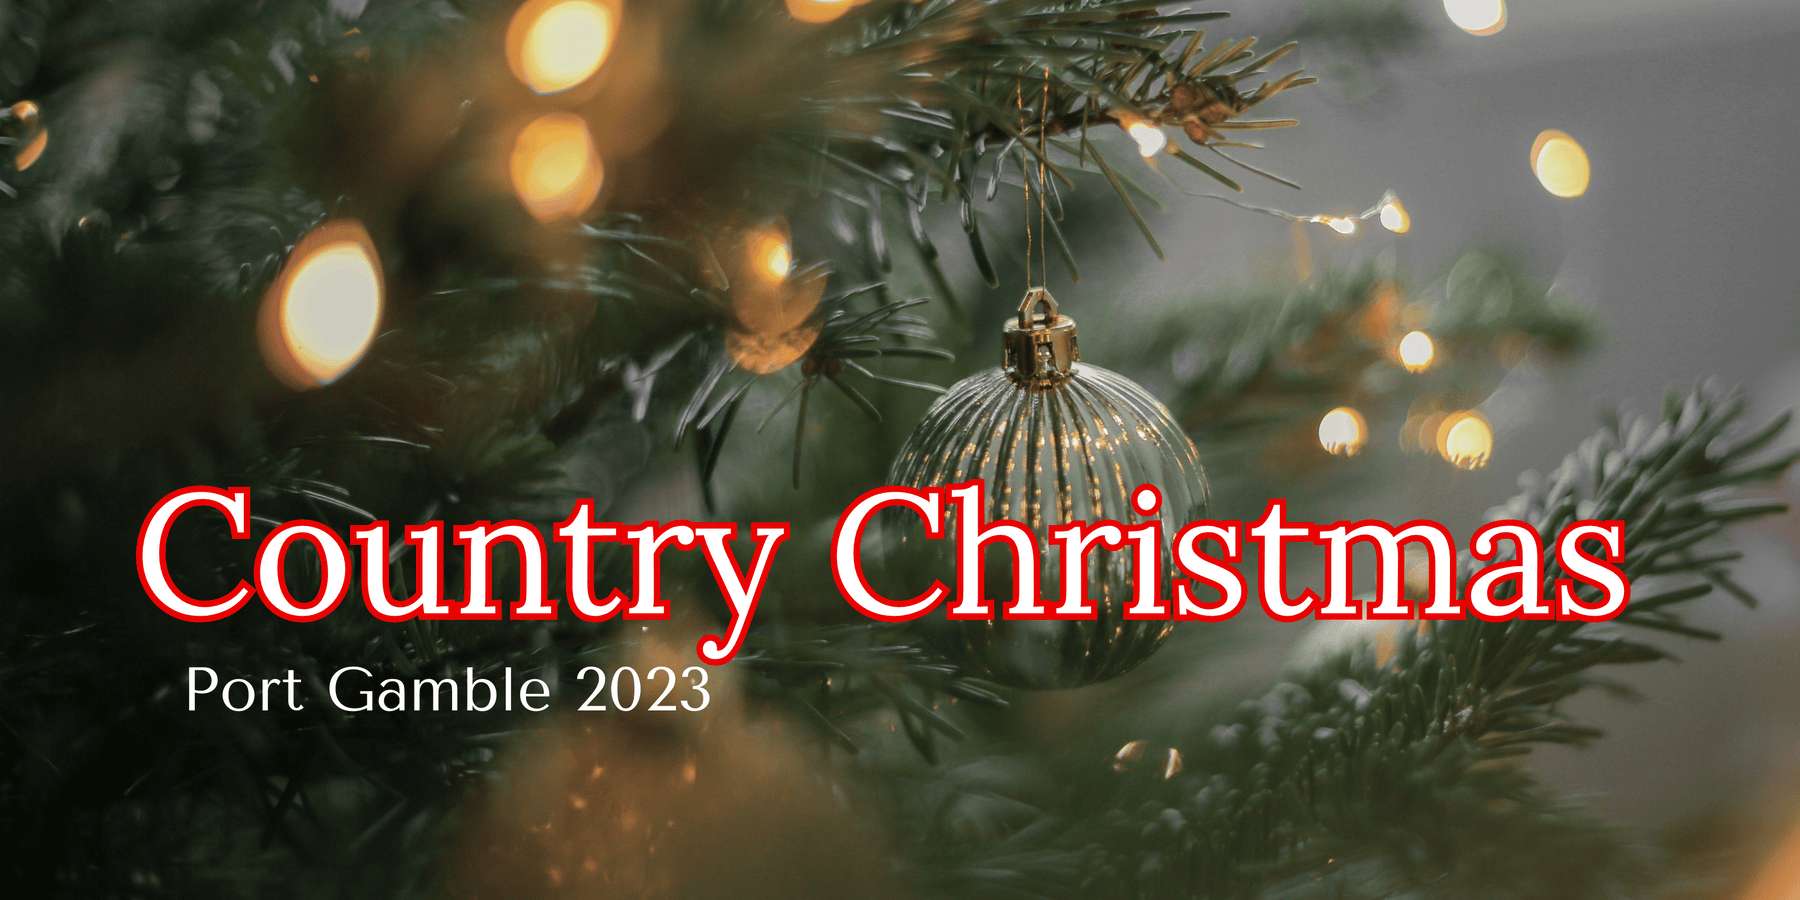 Country Christmas in Port Gamble 2023!